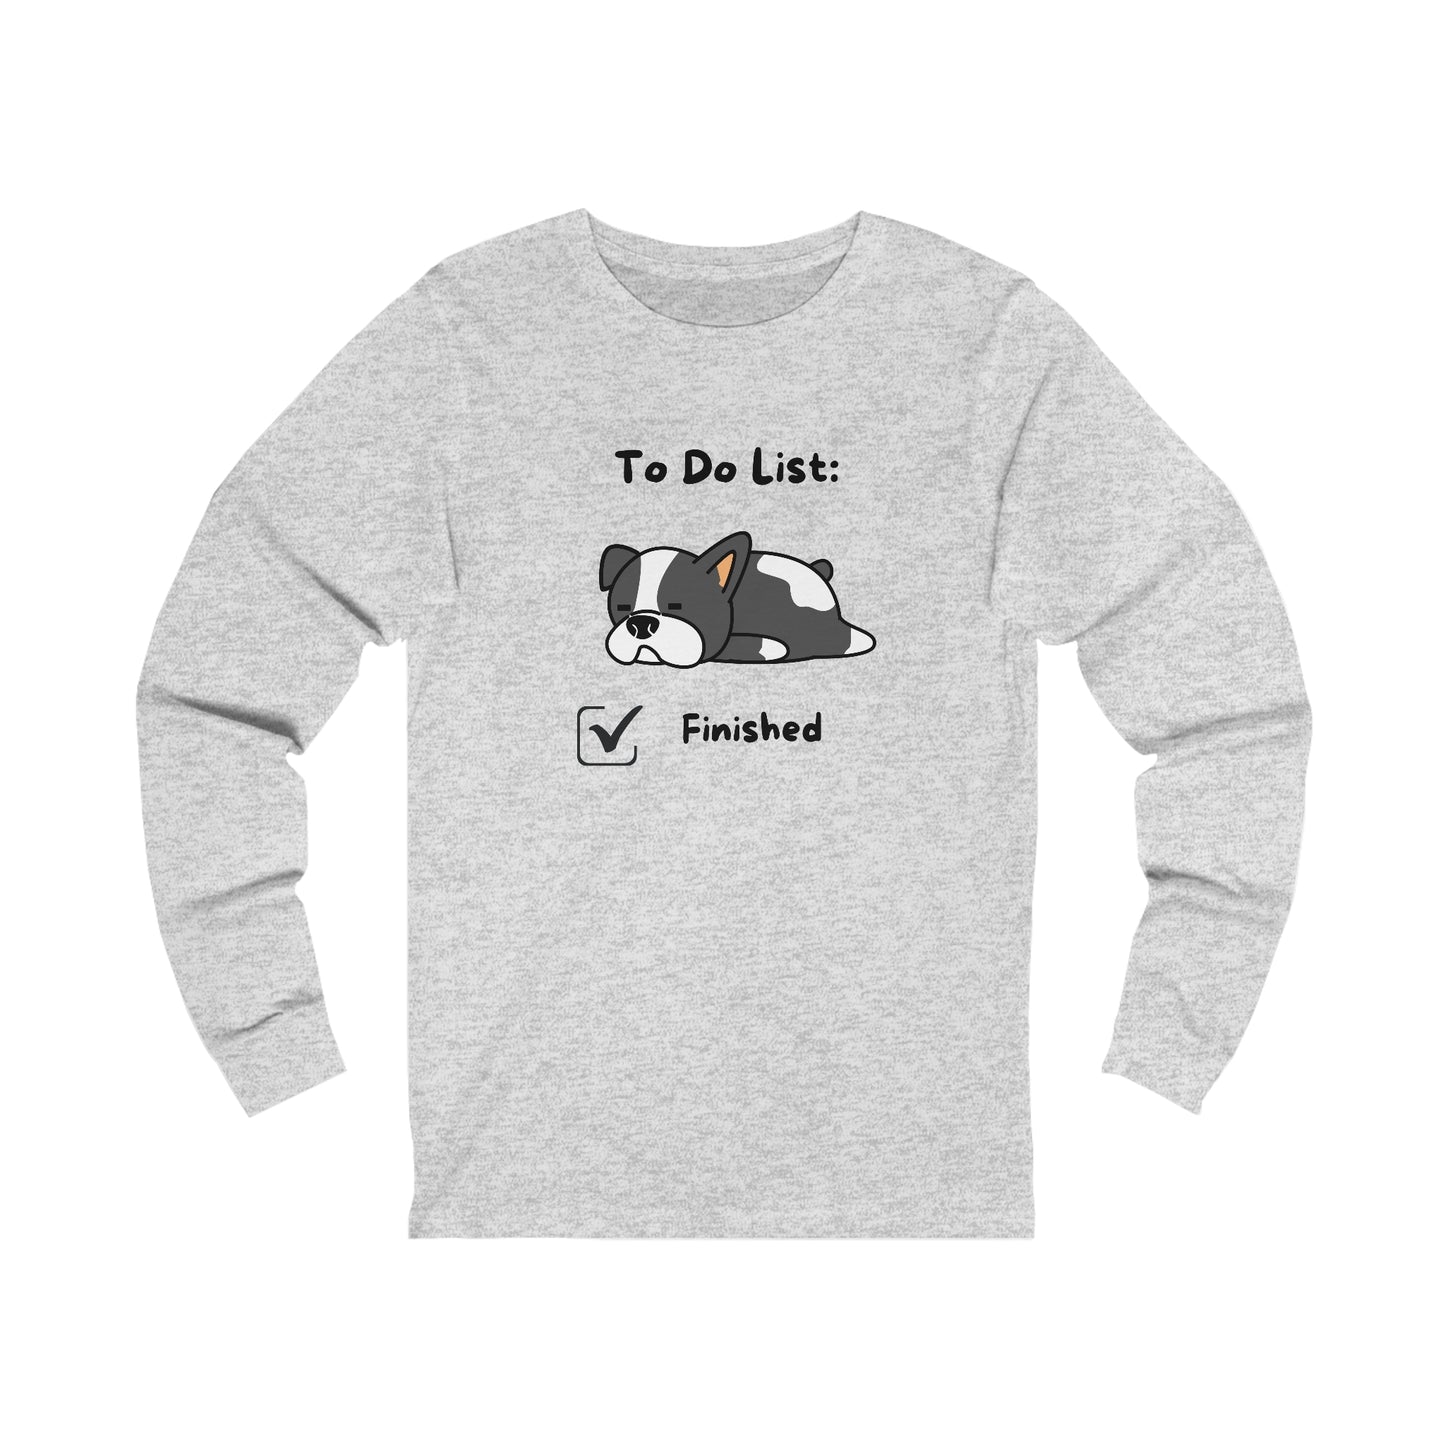 To Do List. Finished. Unisex Jersey Long Sleeve Tee